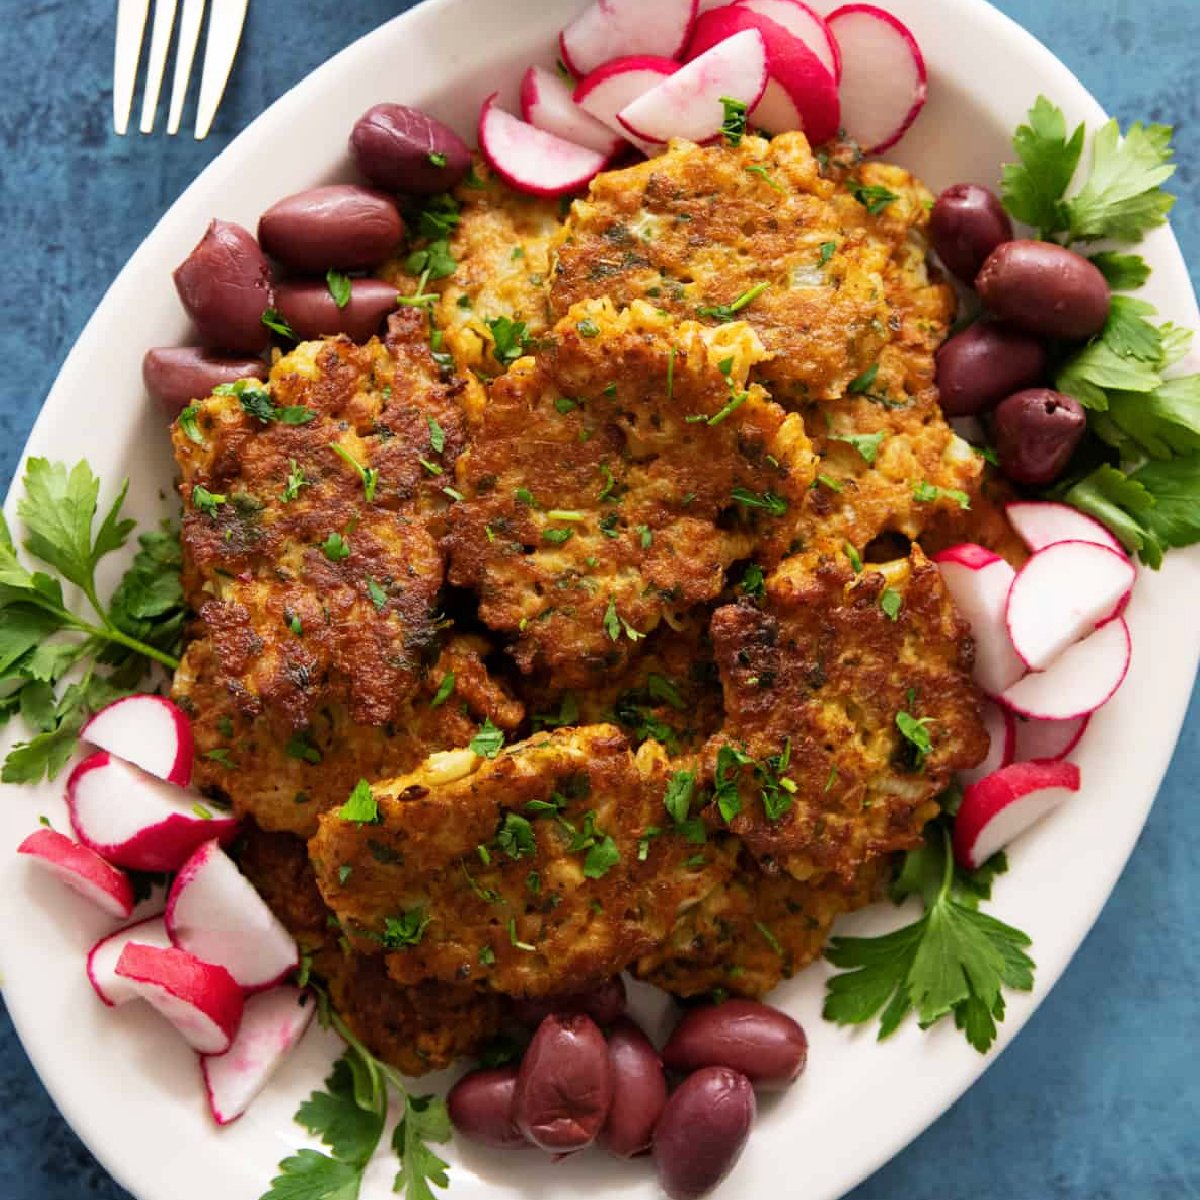 Ready in 30 minutes, these cauliflower fritters are packed with Mediterranean spices and herbs. Serve with some salad and bread for a complete lunch or dinner.
